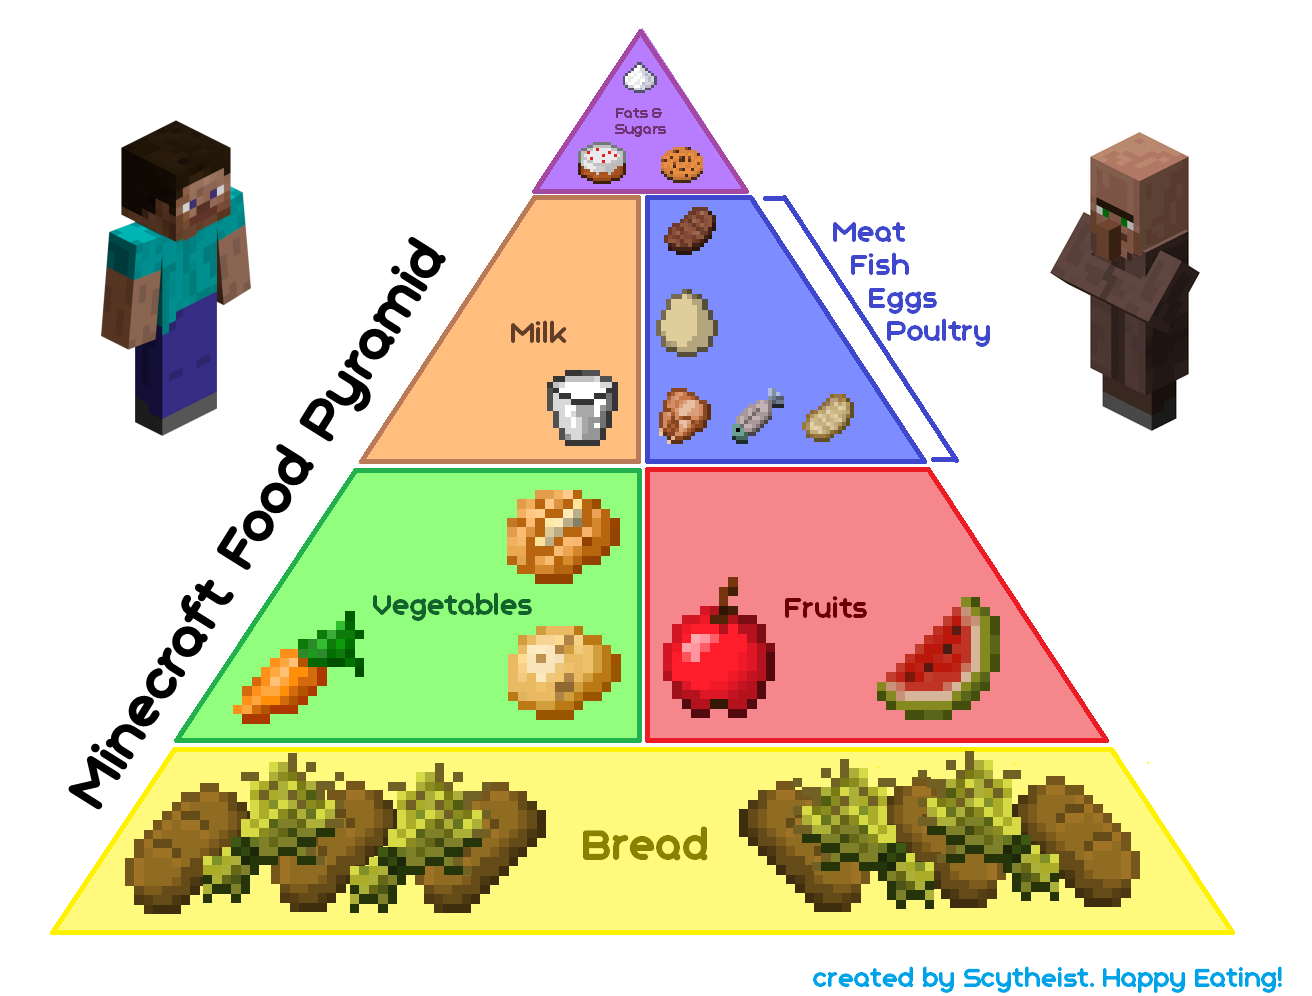 A Minecraft Food Pyramid for your Healthy and Balanced Diet!